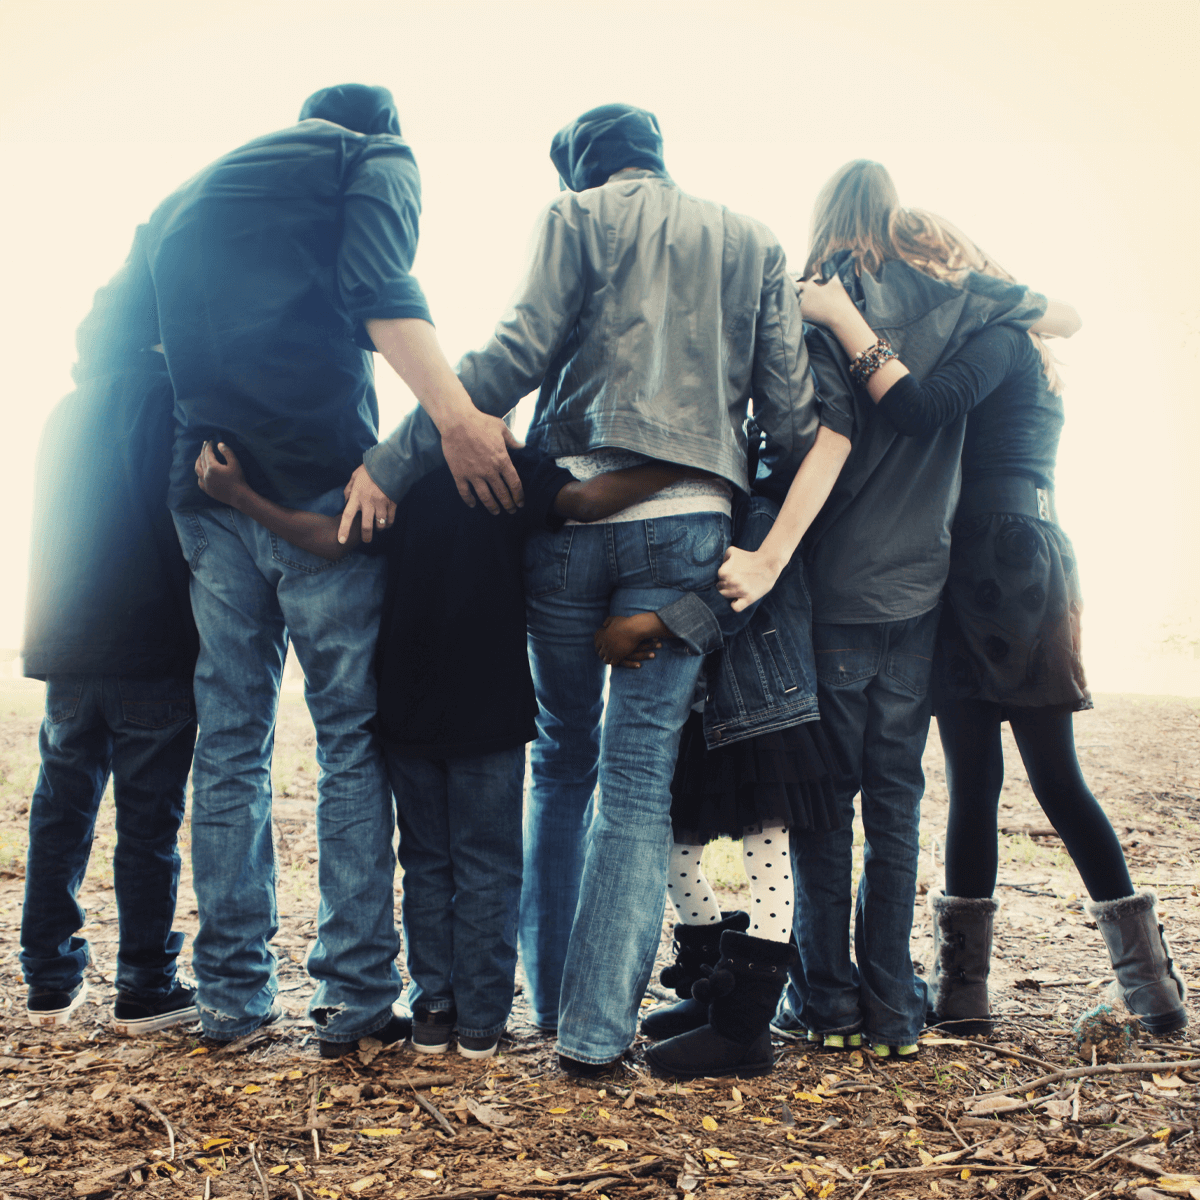 Chosen family shown from behind in circular group hug